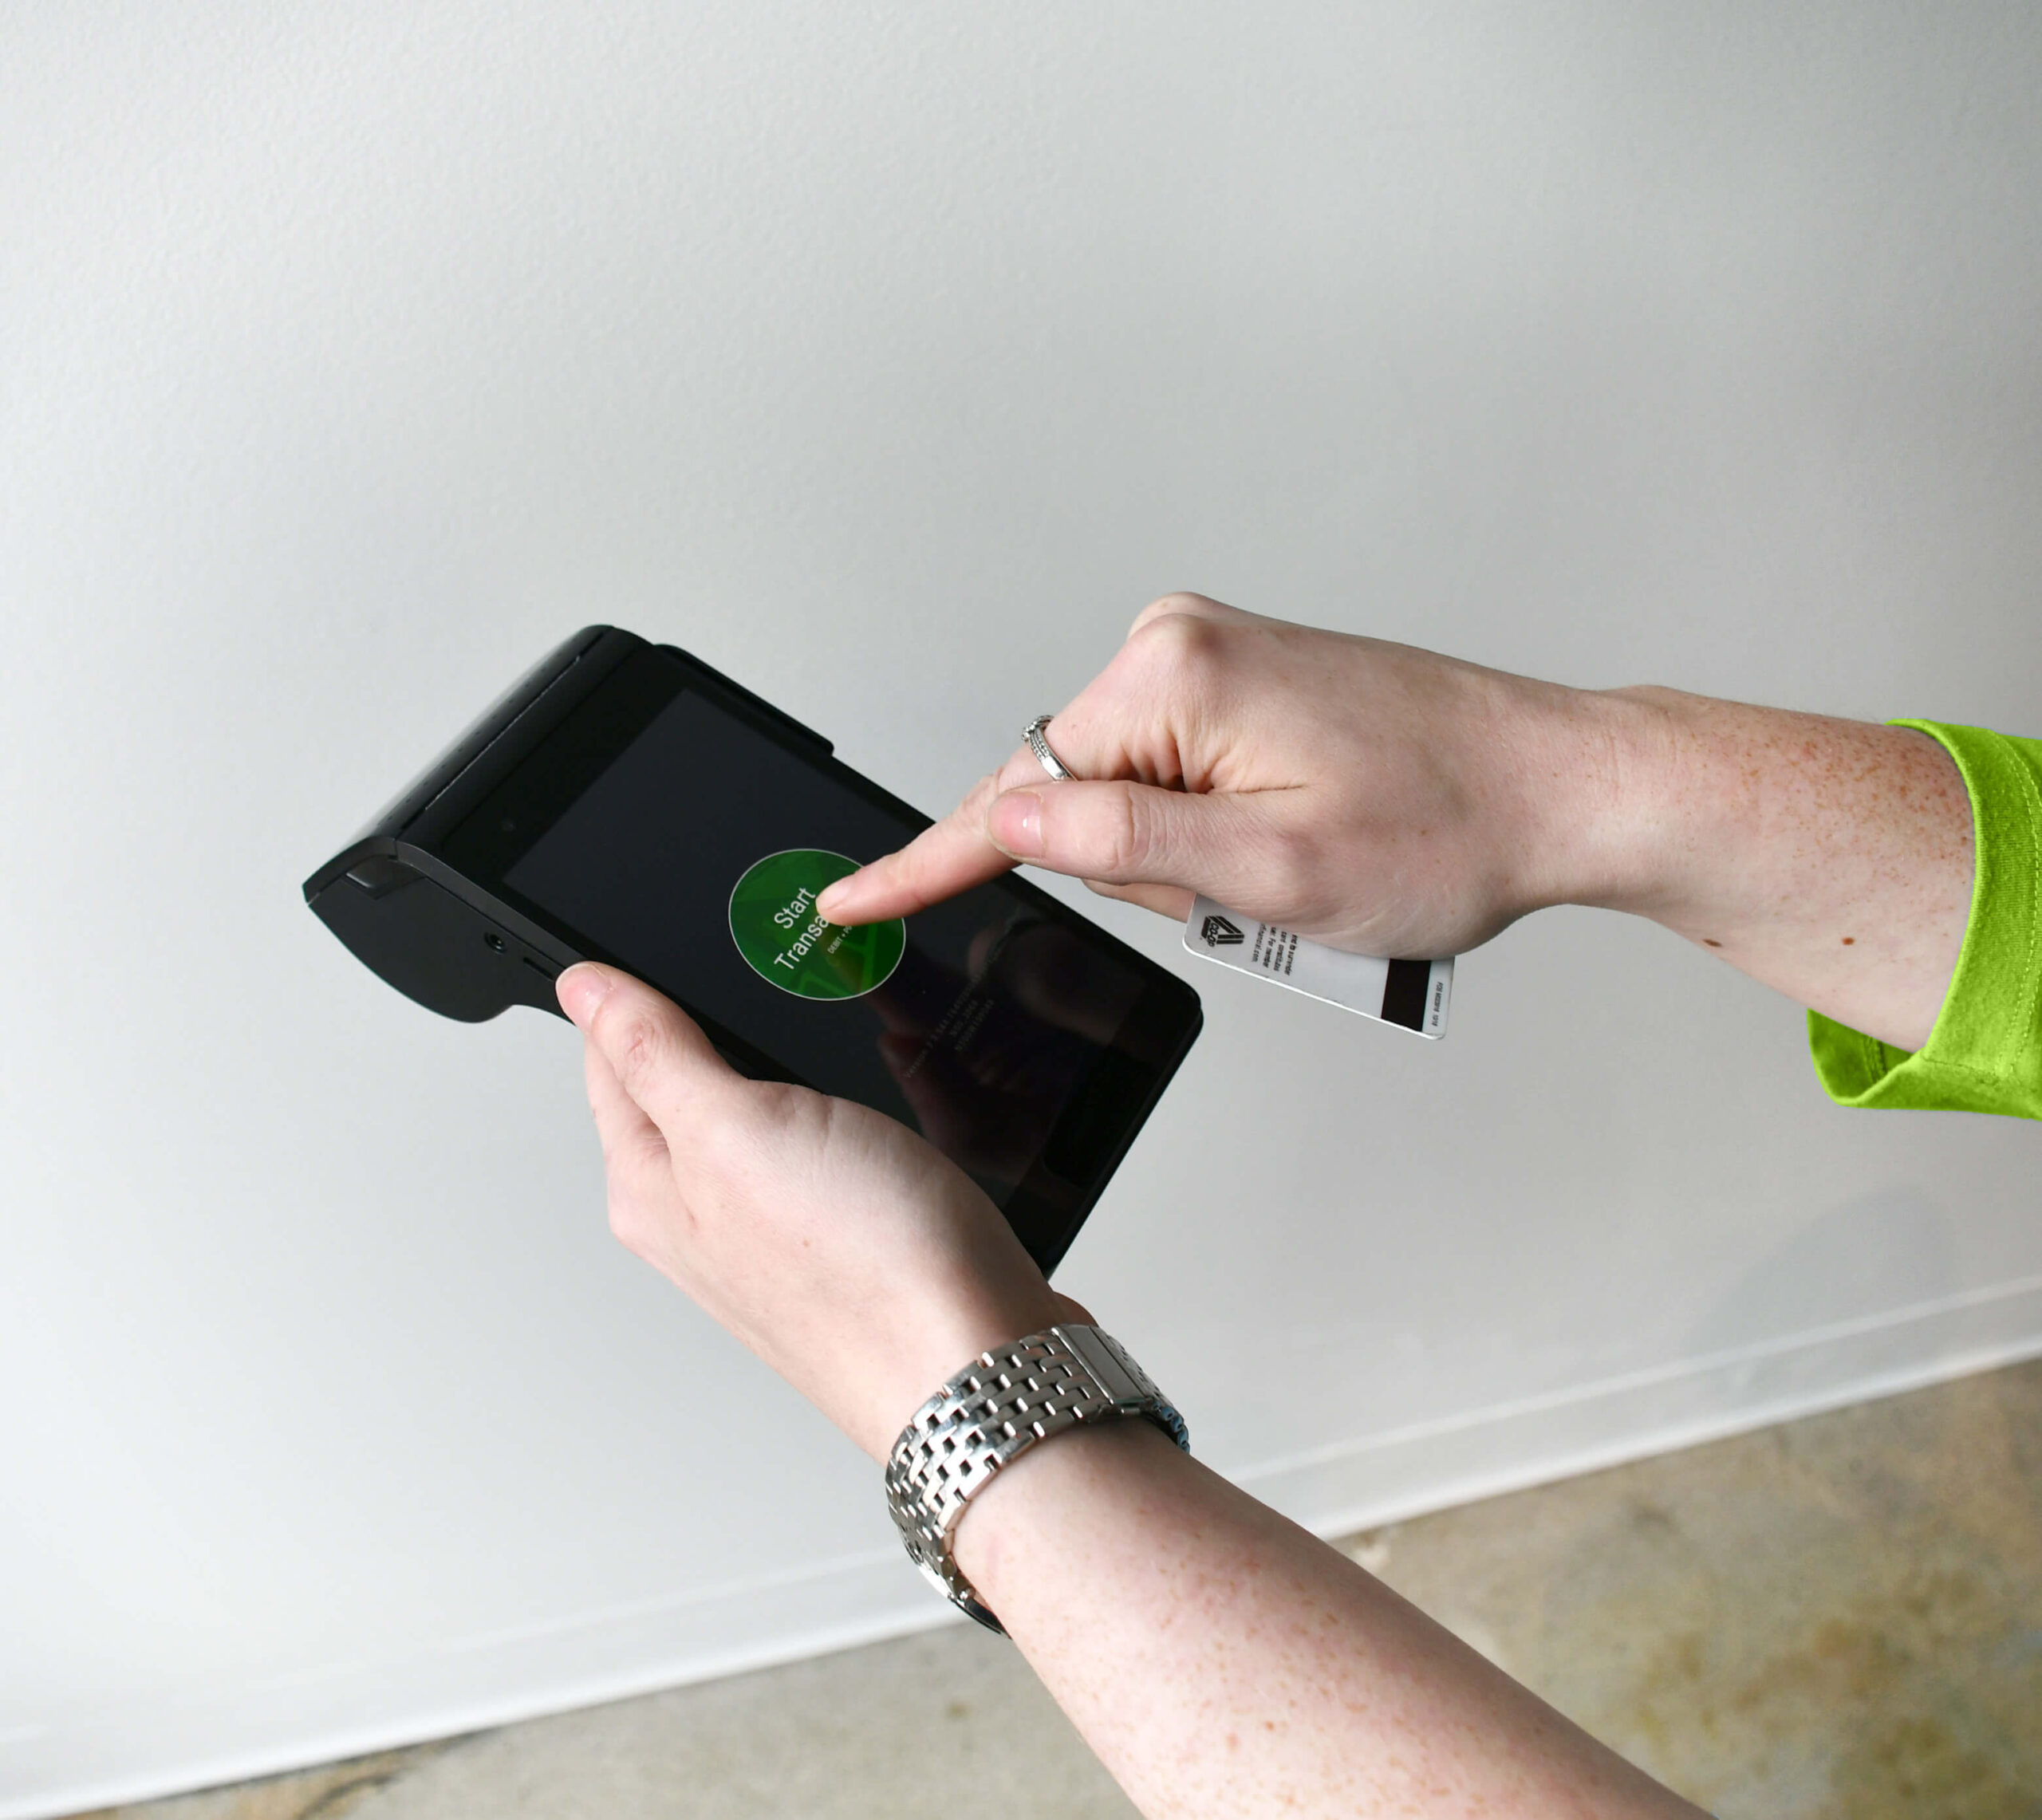 A woman using the ThirdPhase Processor cannabis payment equipment